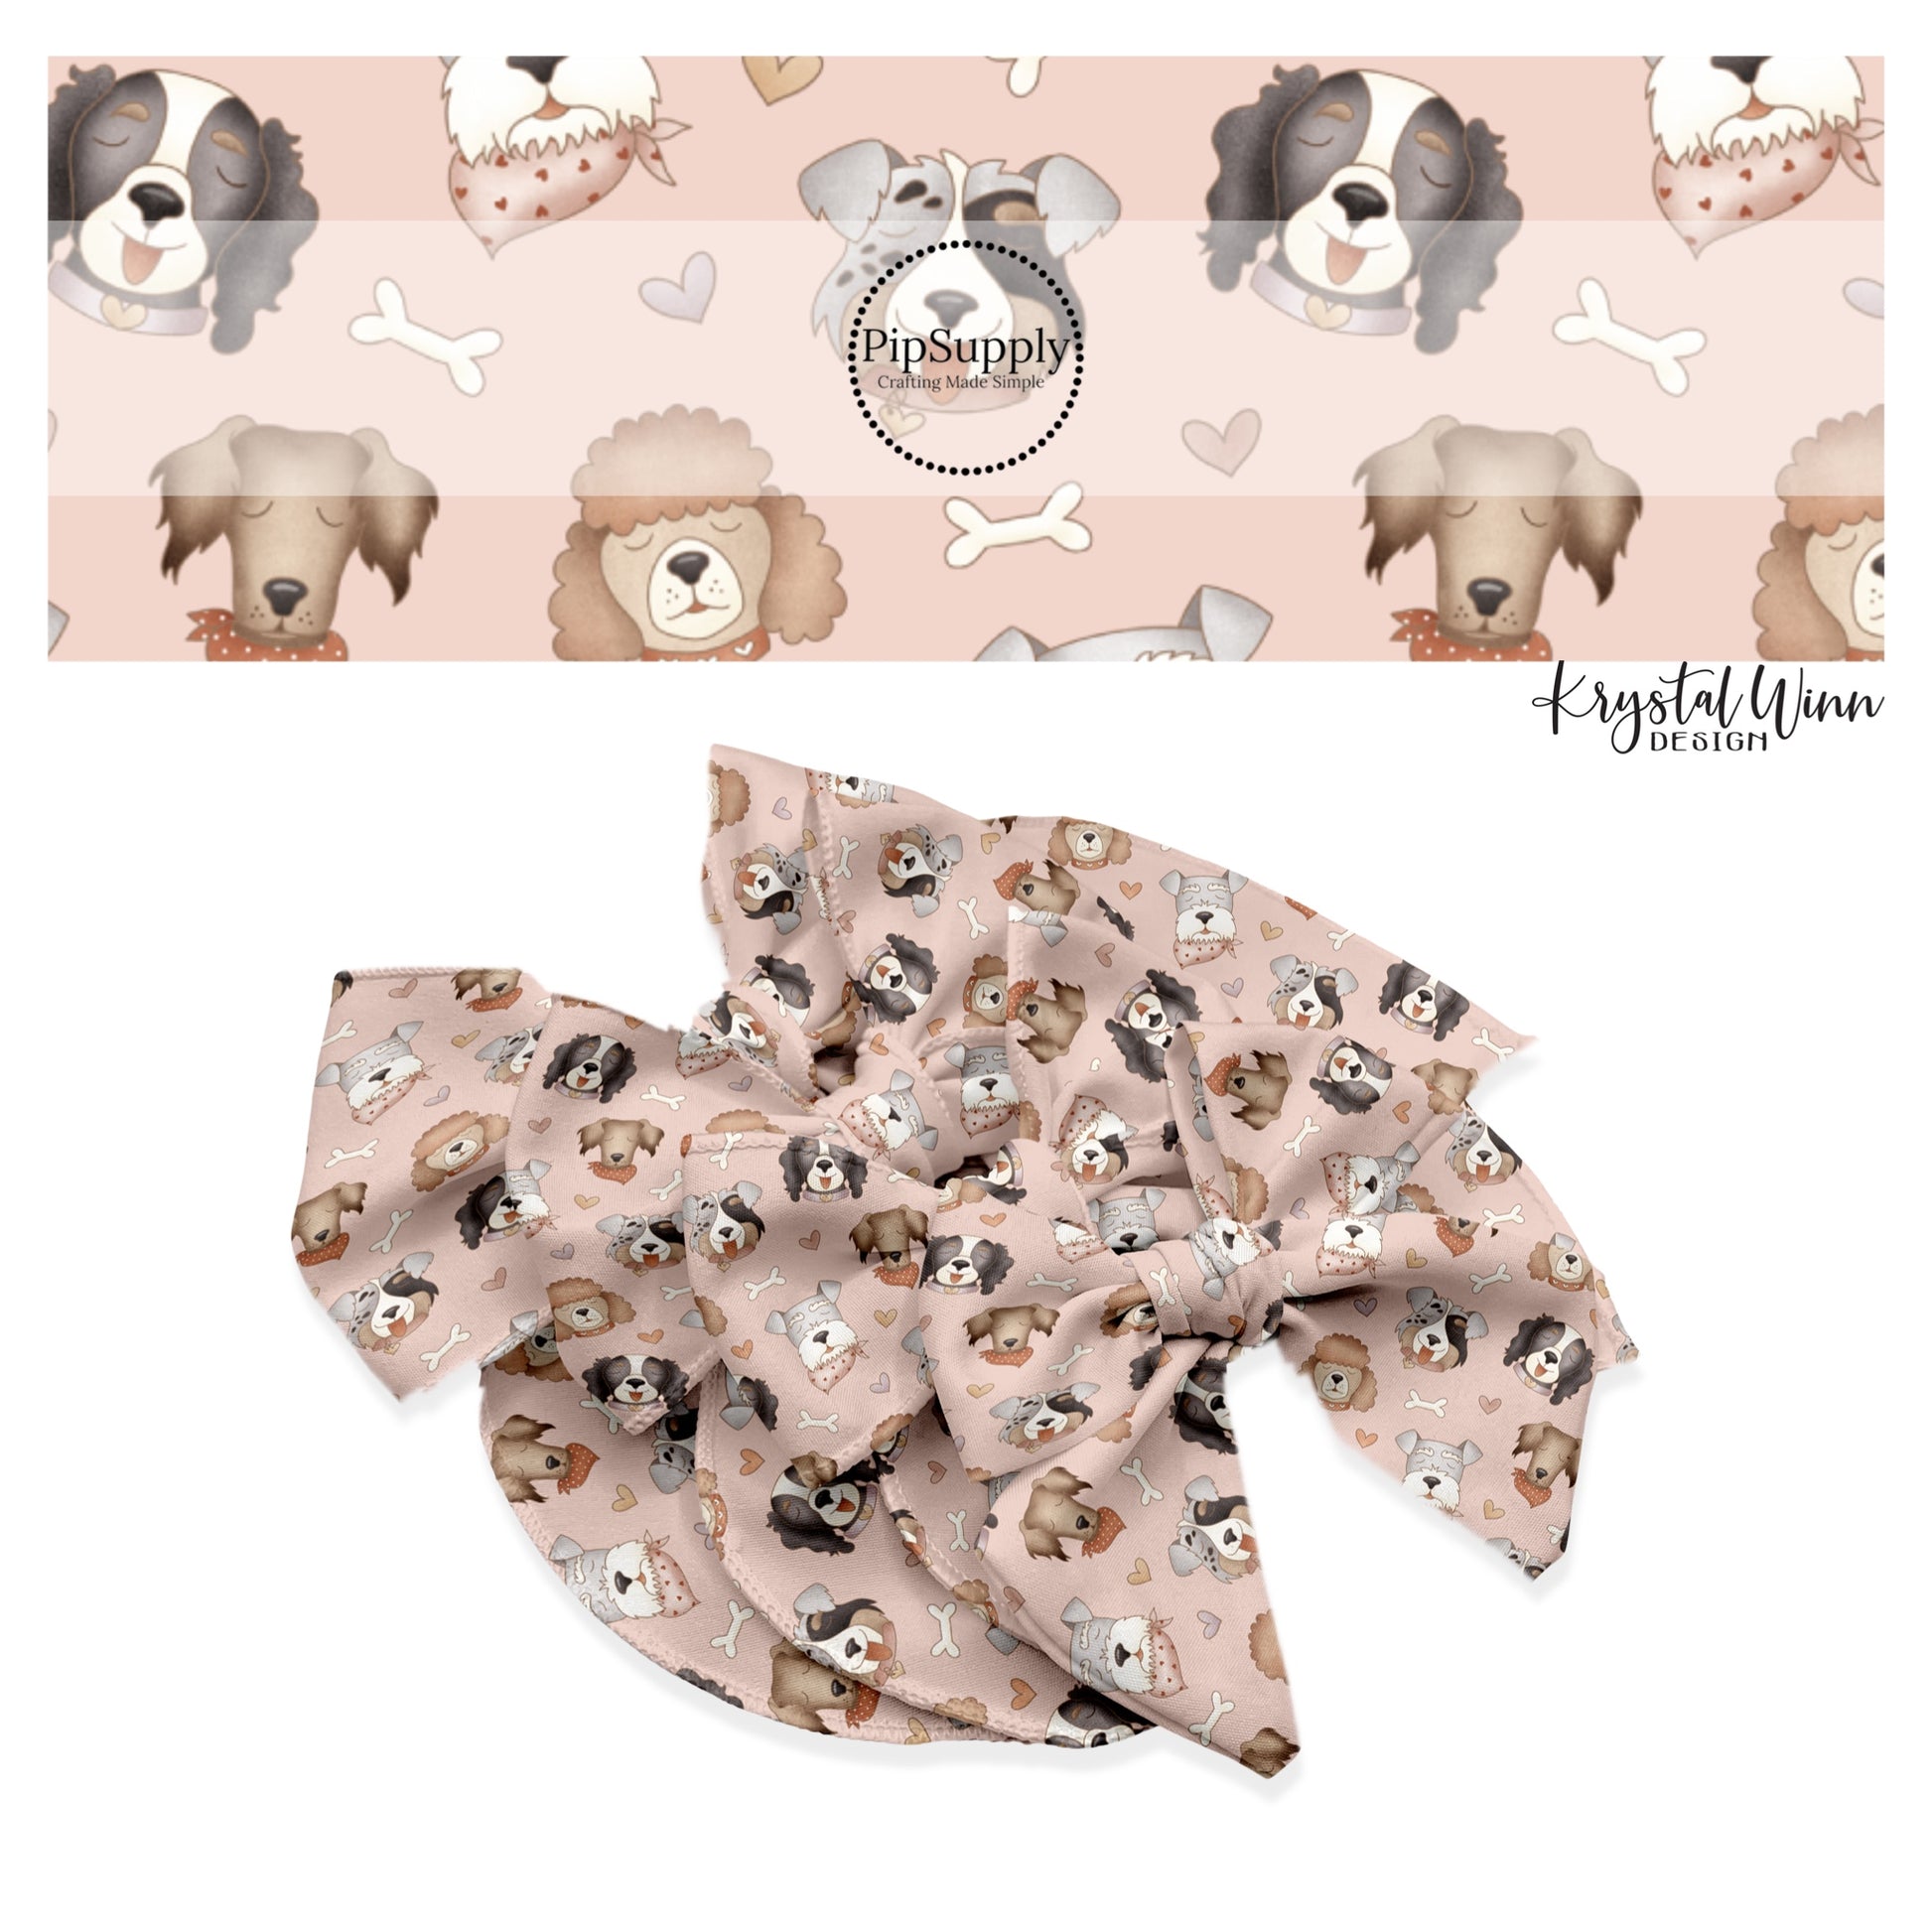 Puppies with hearts and bones on pink hair bow strips